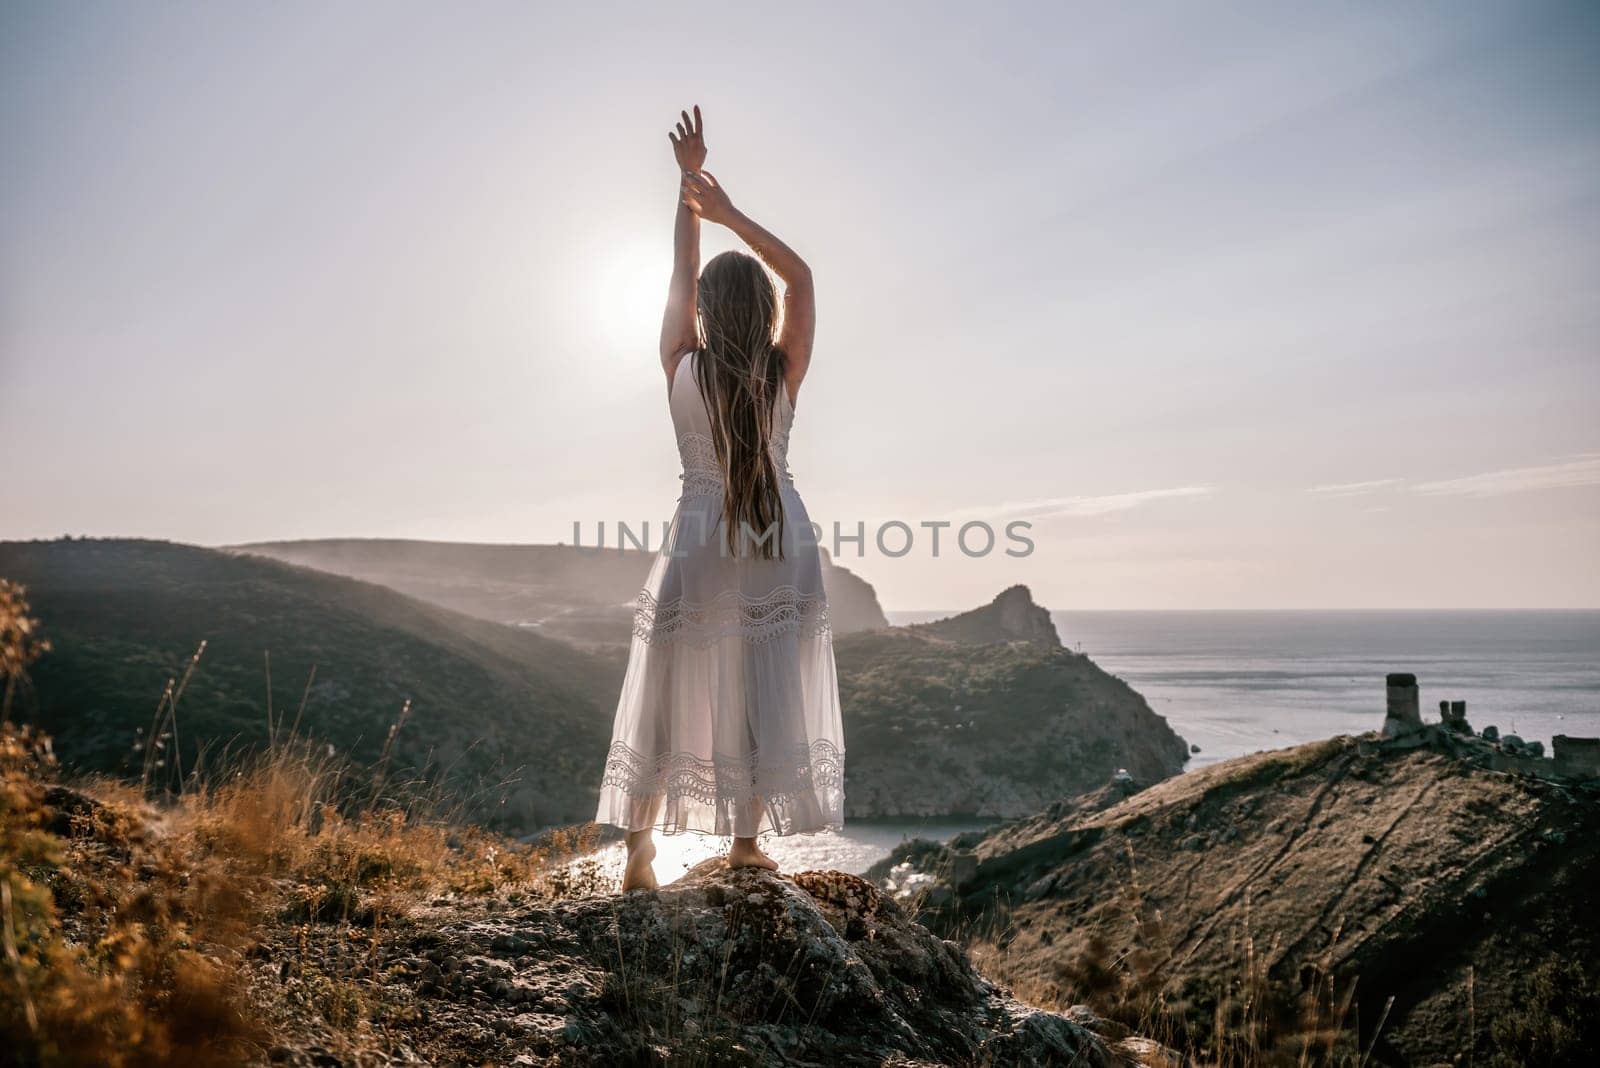 A woman stands on a hill overlooking the ocean. She is wearing a white dress and has her hands on her head. The scene is serene and peaceful, with the woman looking out over the water